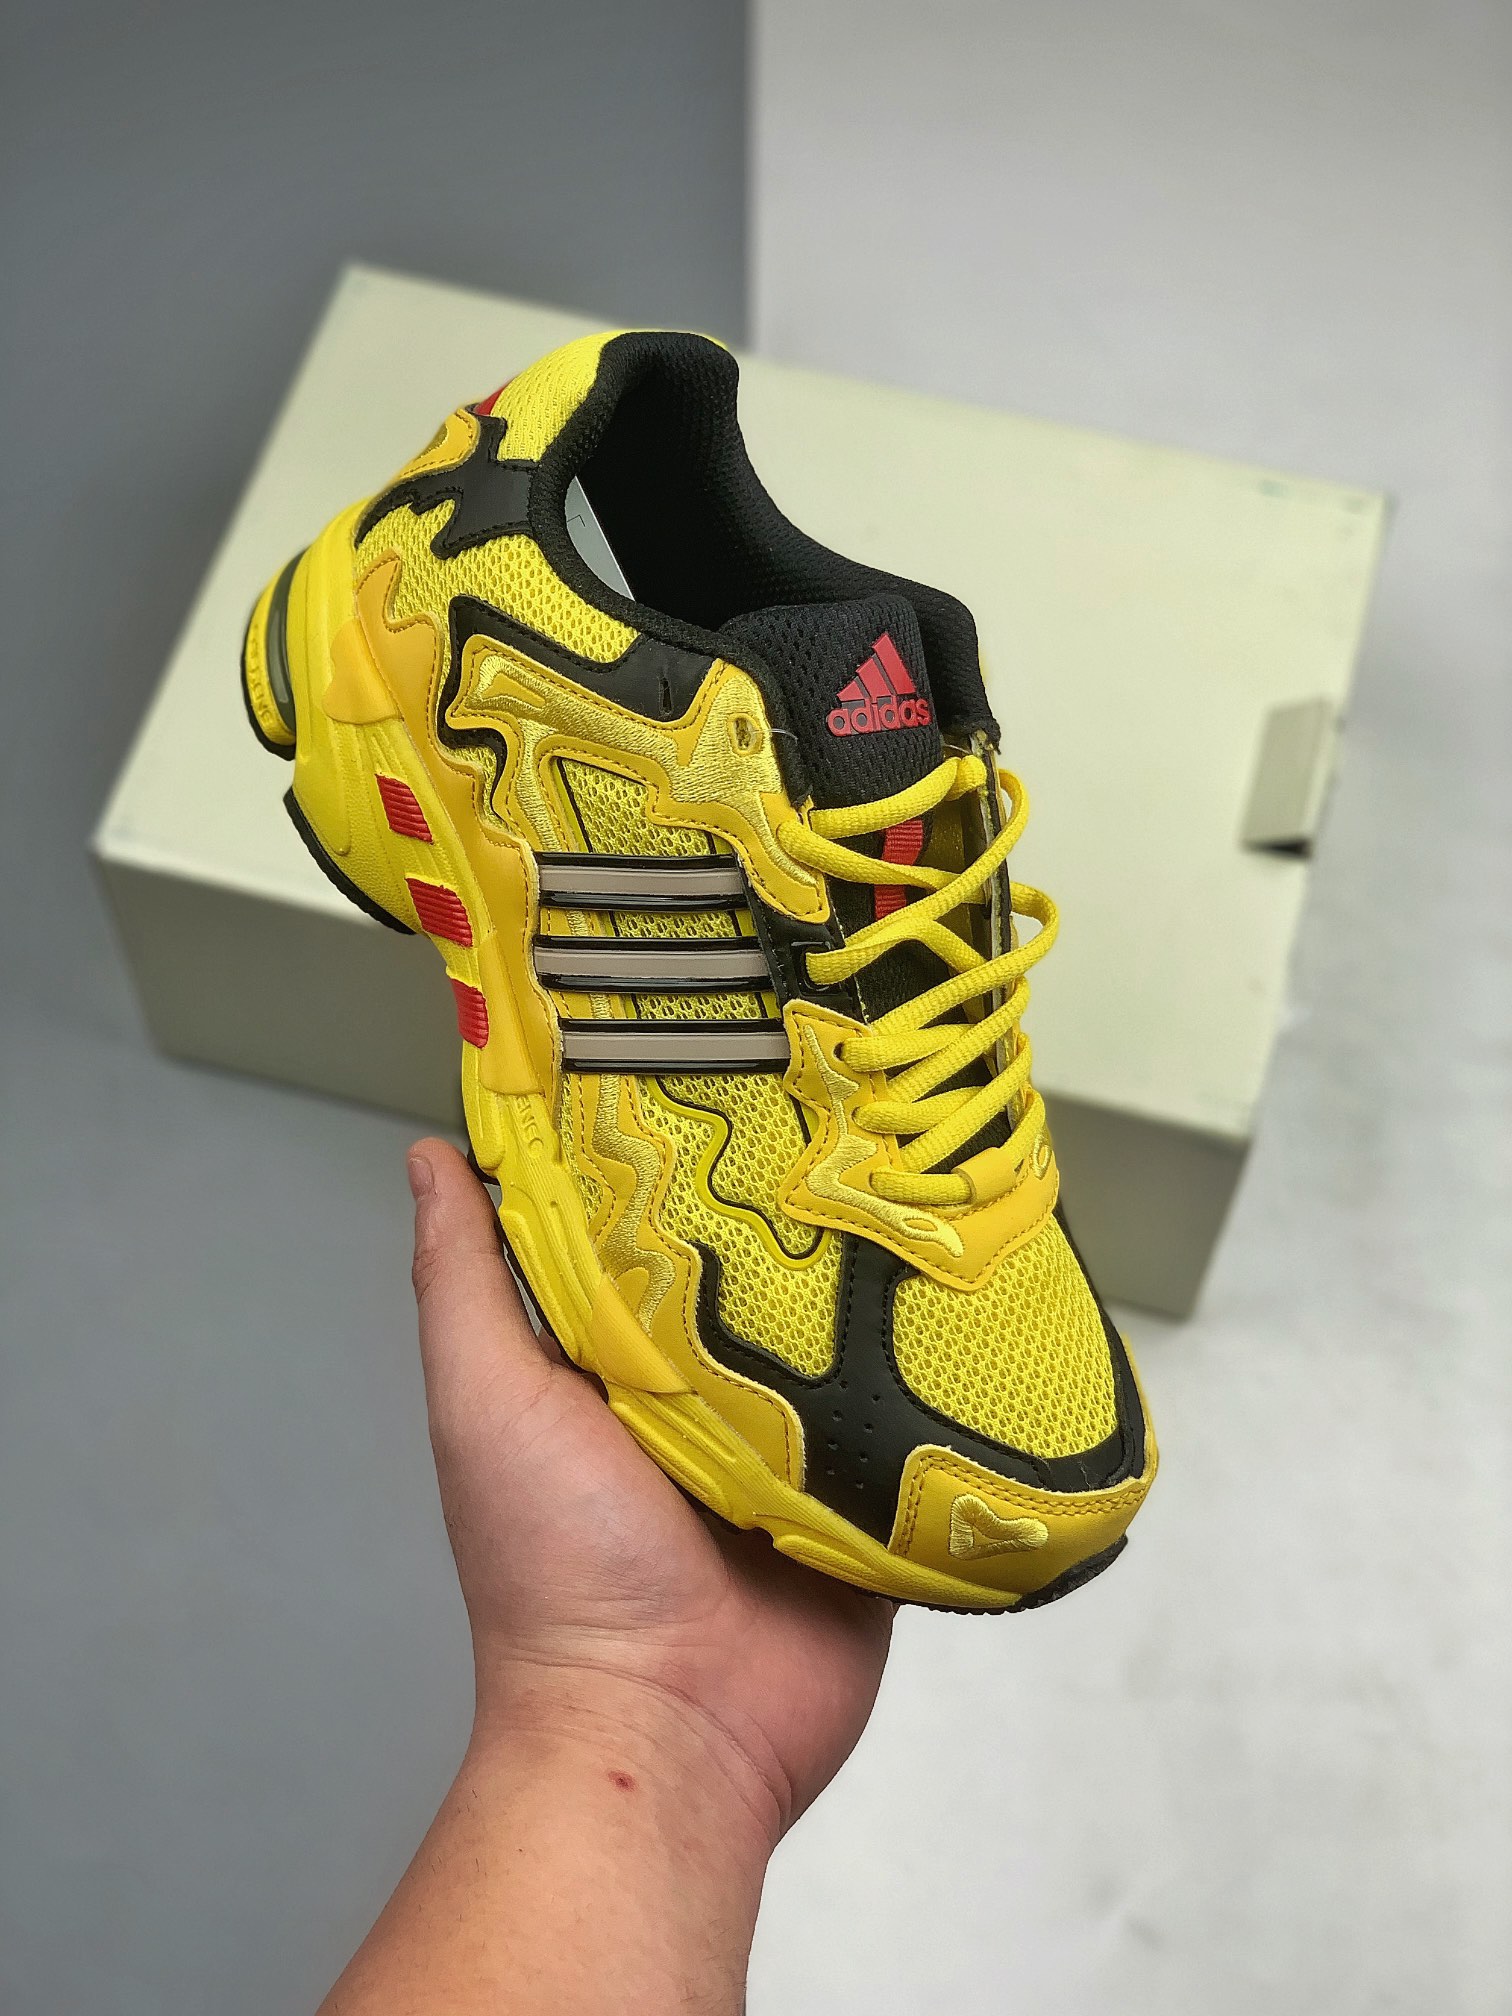 Adidas Bad Bunny x Response CL Yellow GY0101 - Bold Collaboration Sneakers